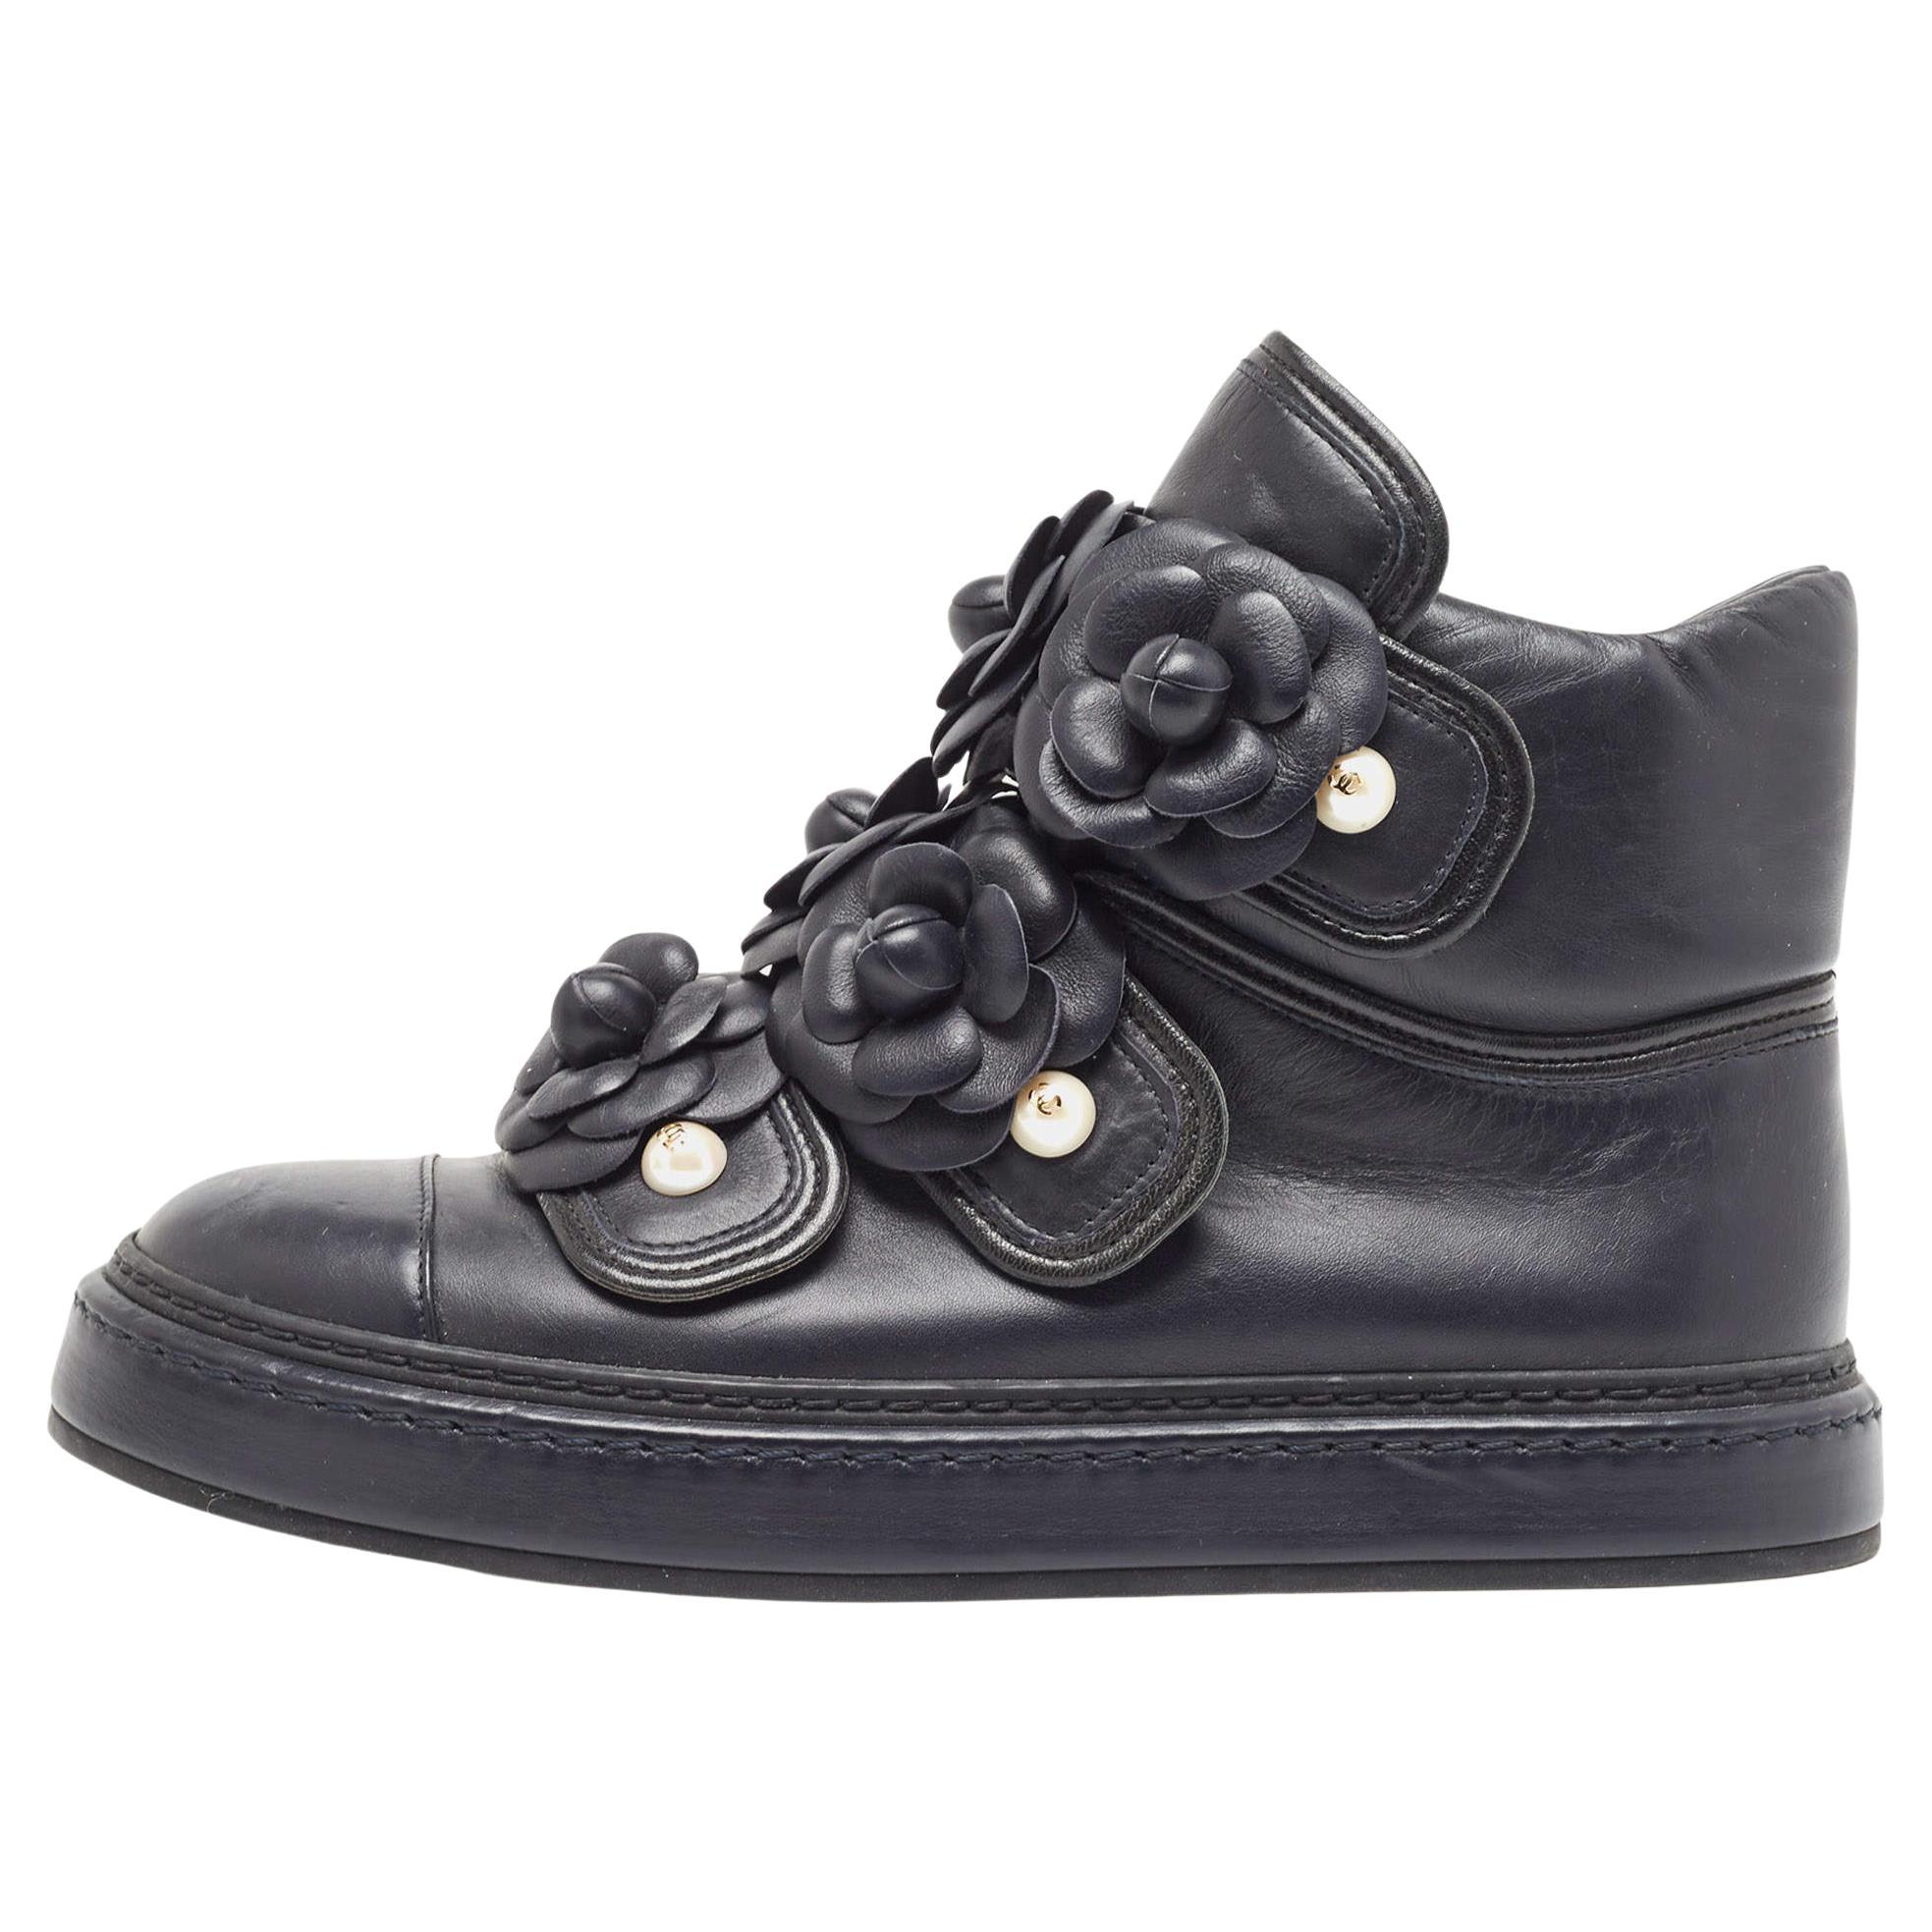 Chanel Black Leather Camellia Flowers Embellished High Top Sneakers Size 36.5 For Sale